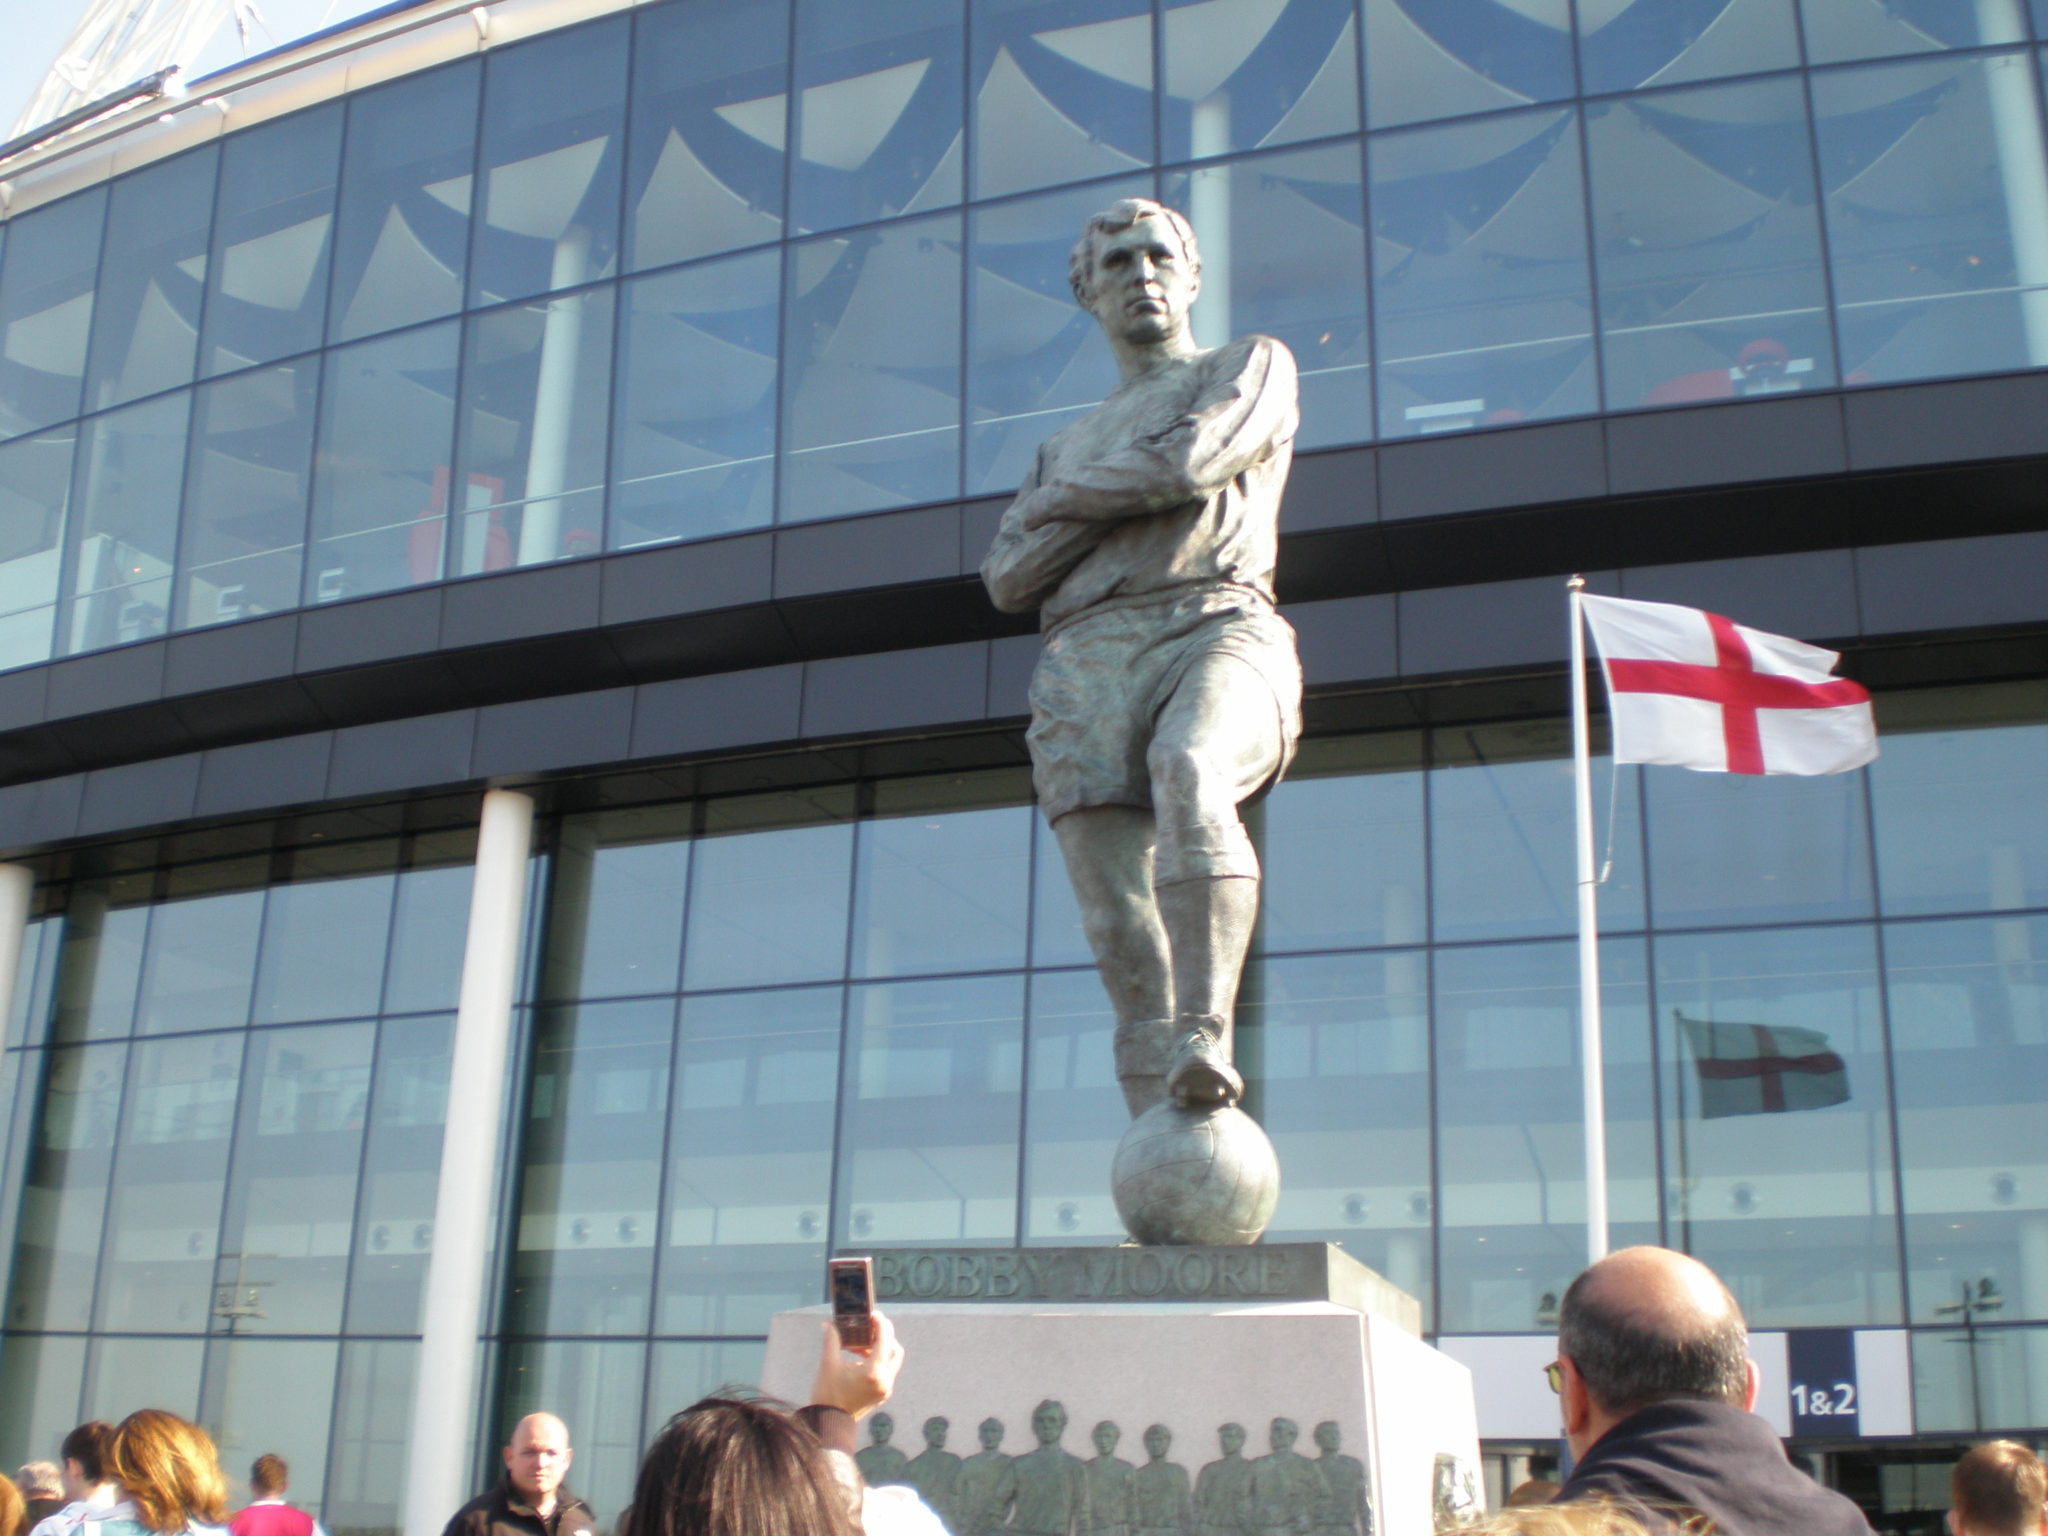 A statue stands at Wembley in honor of Moore.